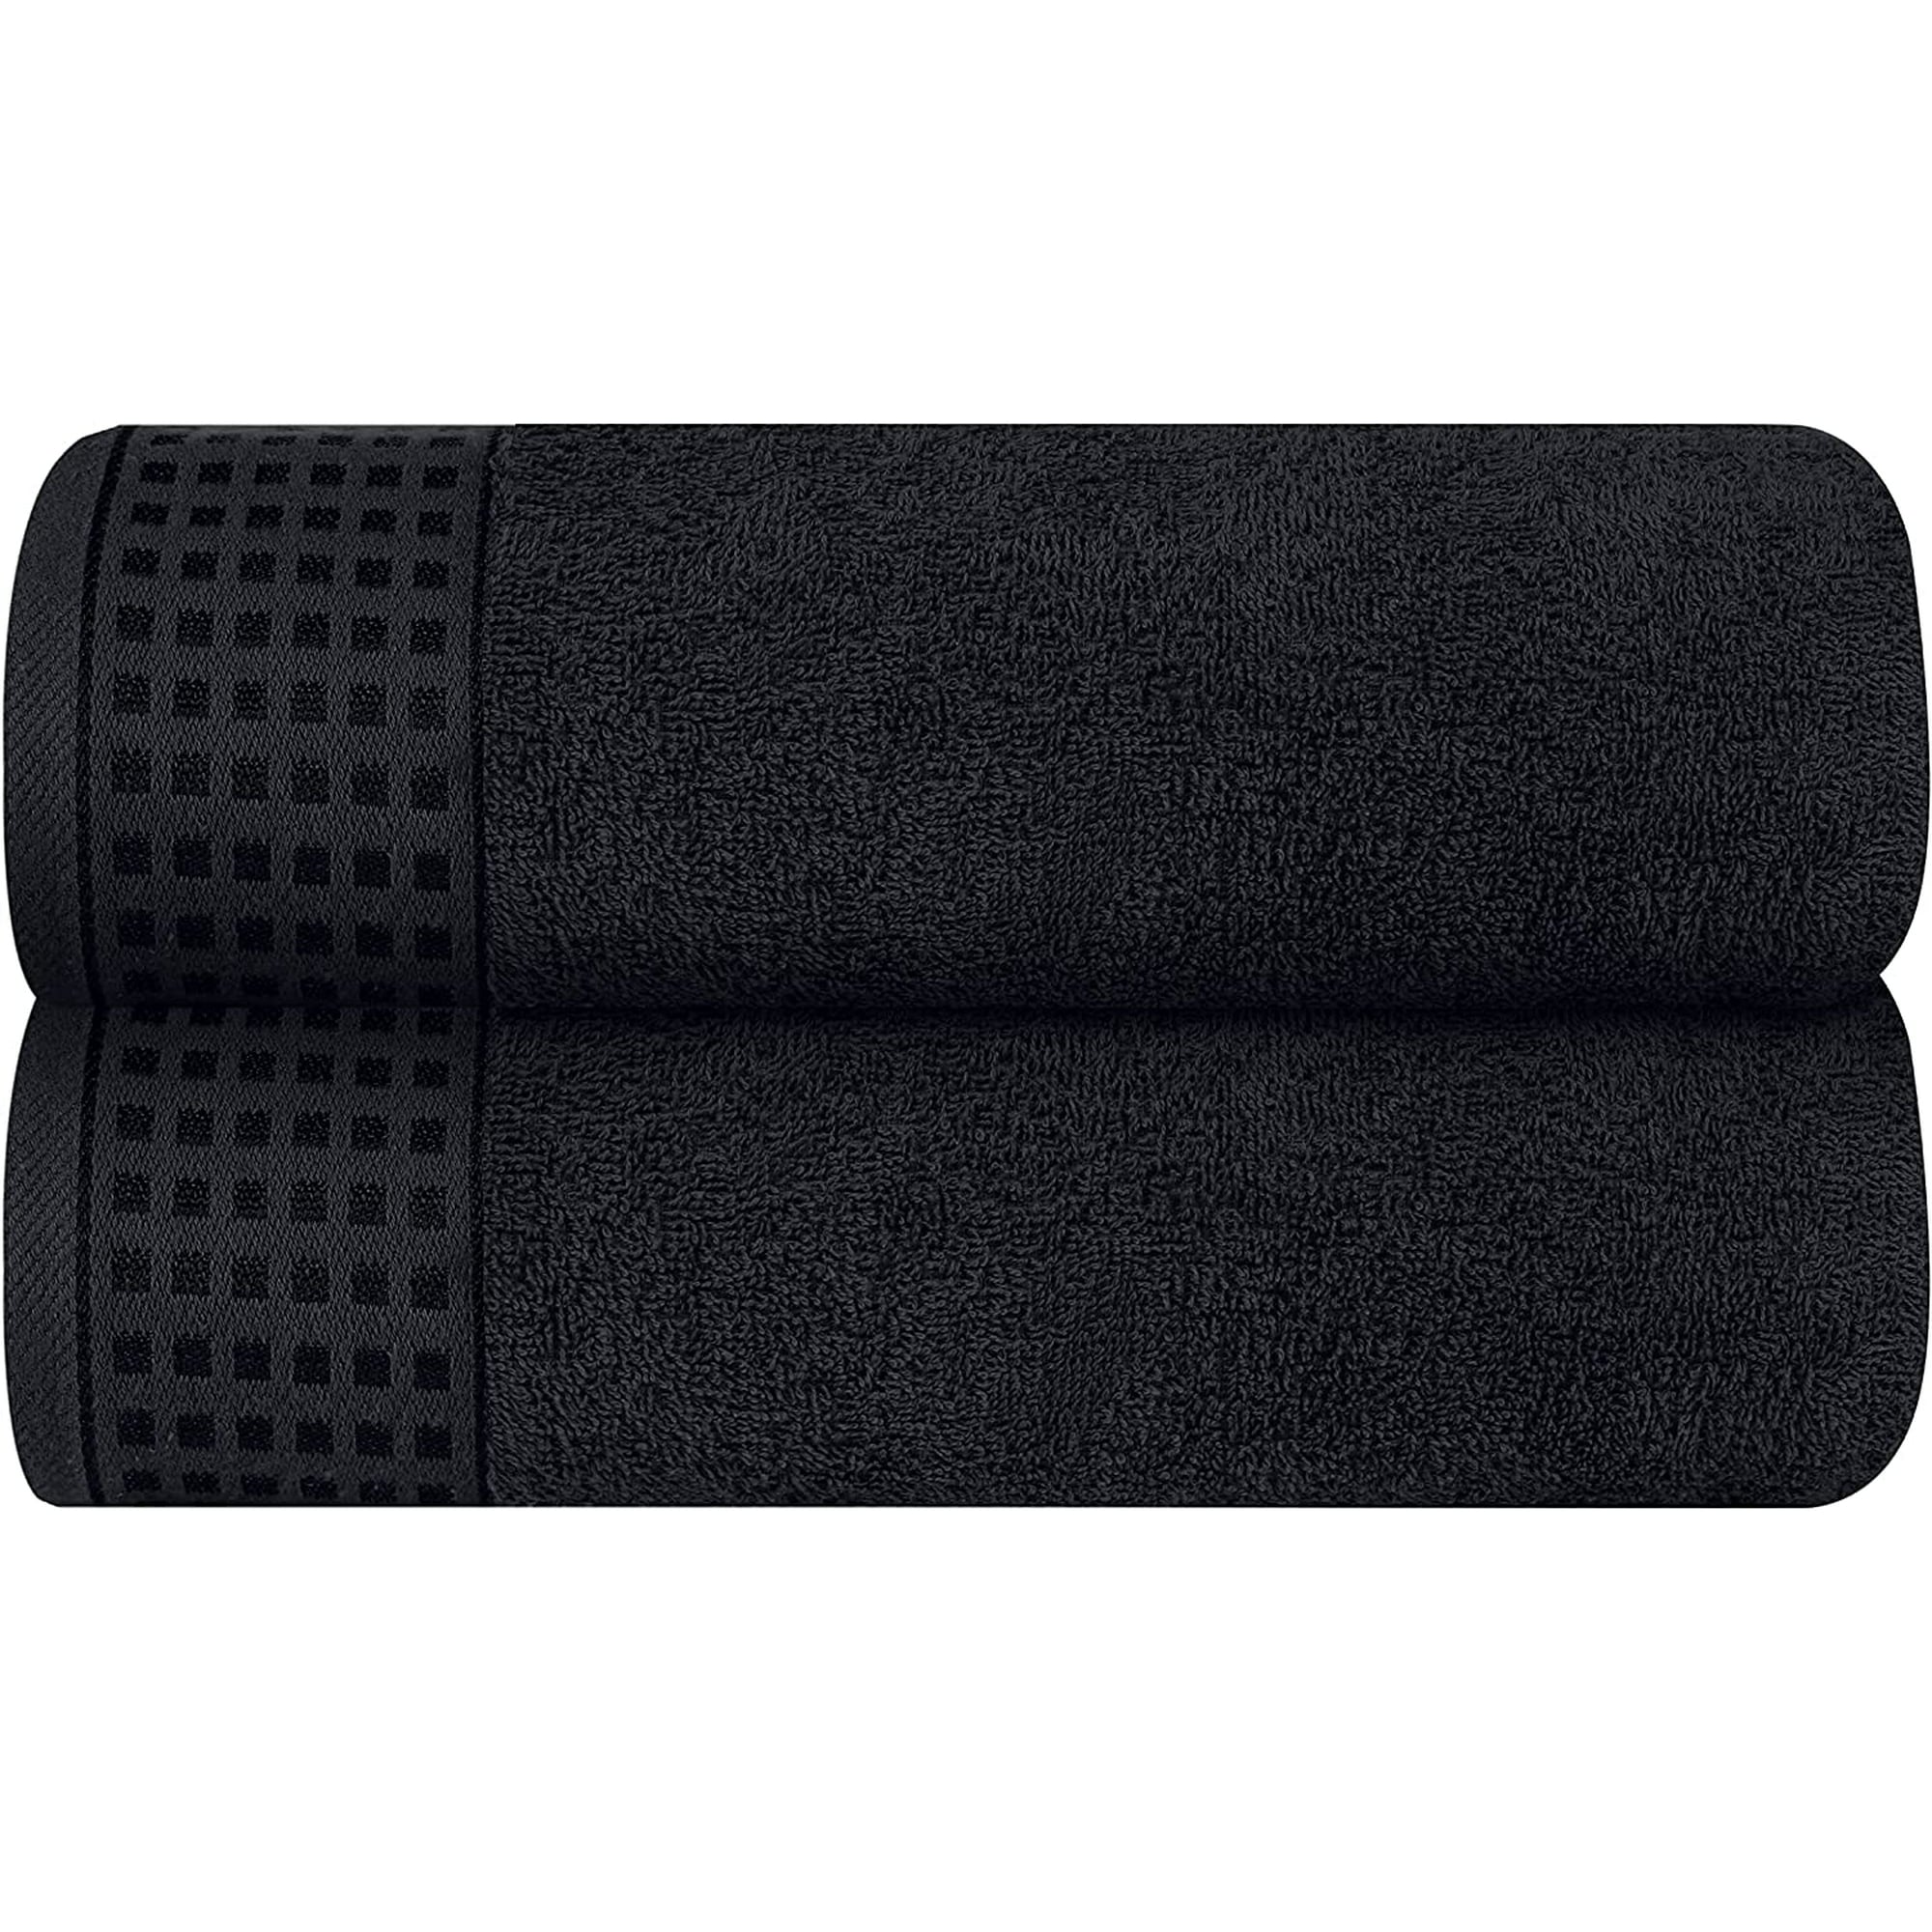 GLAMBURG 100% Cotton 2 Pack Oversized Bath Towel Set 28x55 Inches, Ultra Soft Highly Absorbant Compact Quickdry & Lightweight Large Bath Towels, Ideal for Gym Travel Camp Pool - Black